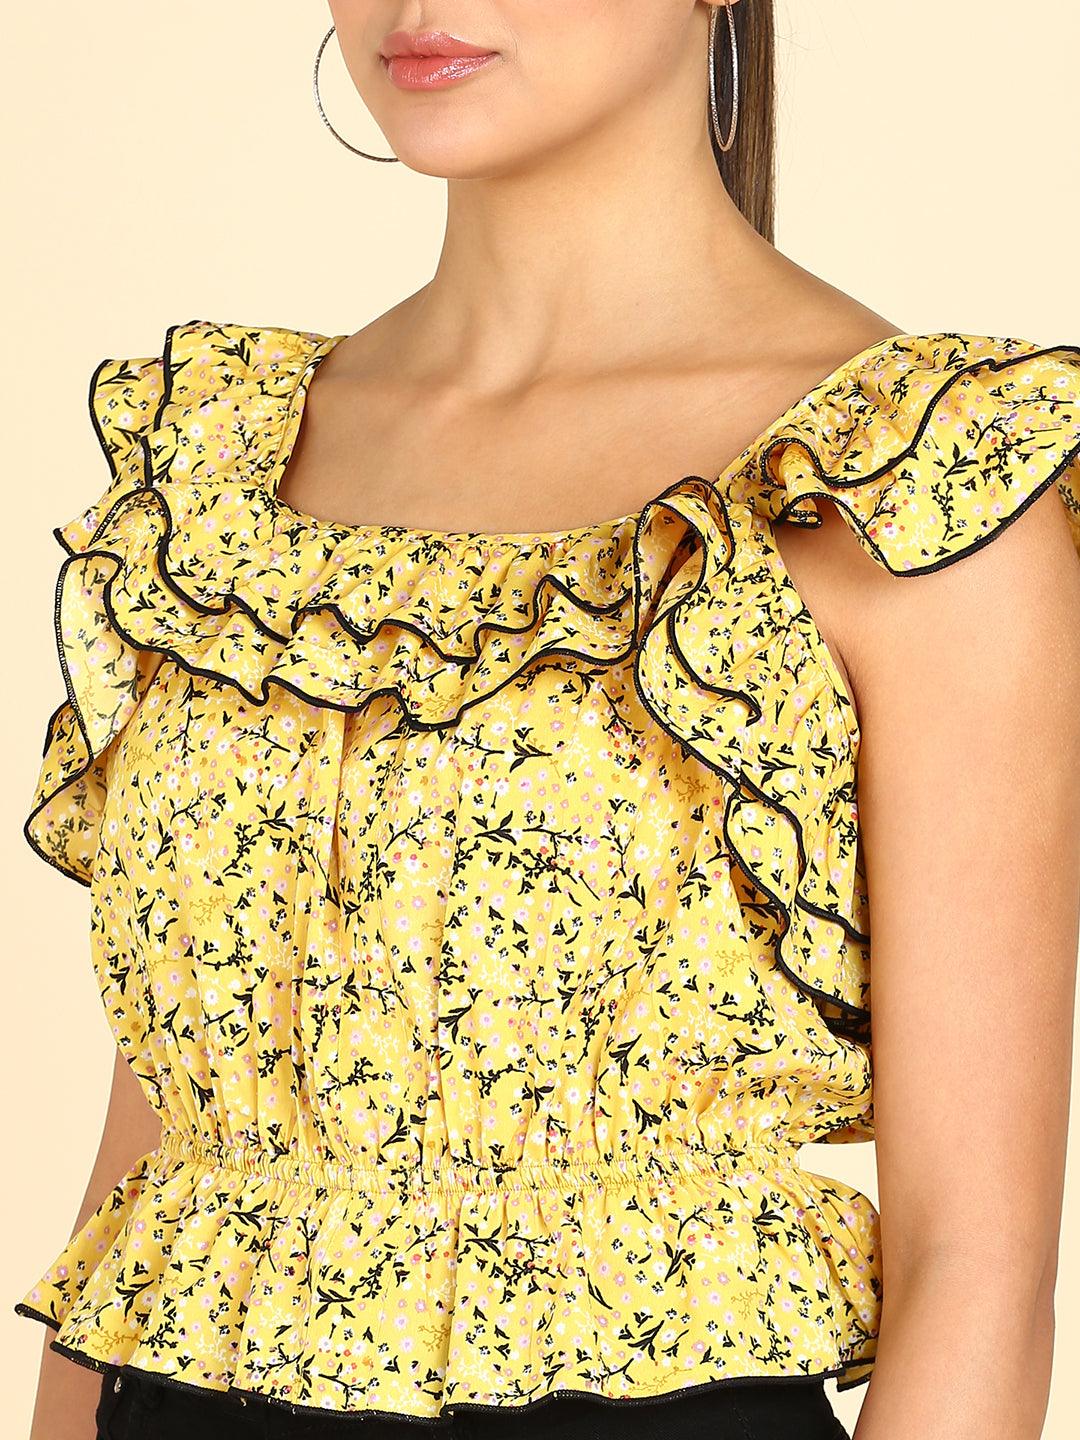 Floral Printed Yellow Empire Top - Znxclothing